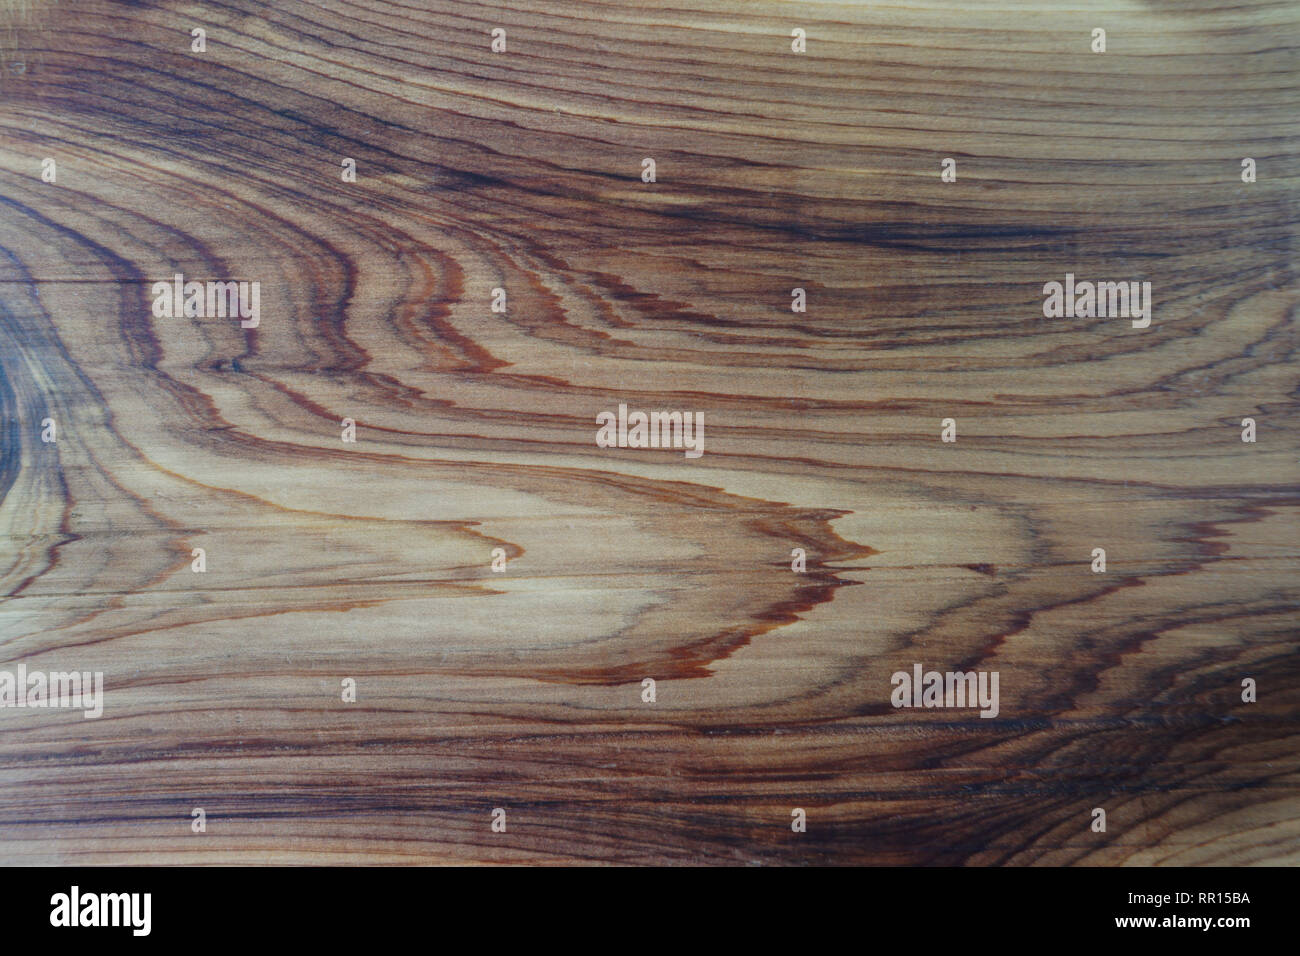 Closeup of a cedar plank showing natural wood-grain pattern as wood background Stock Photo